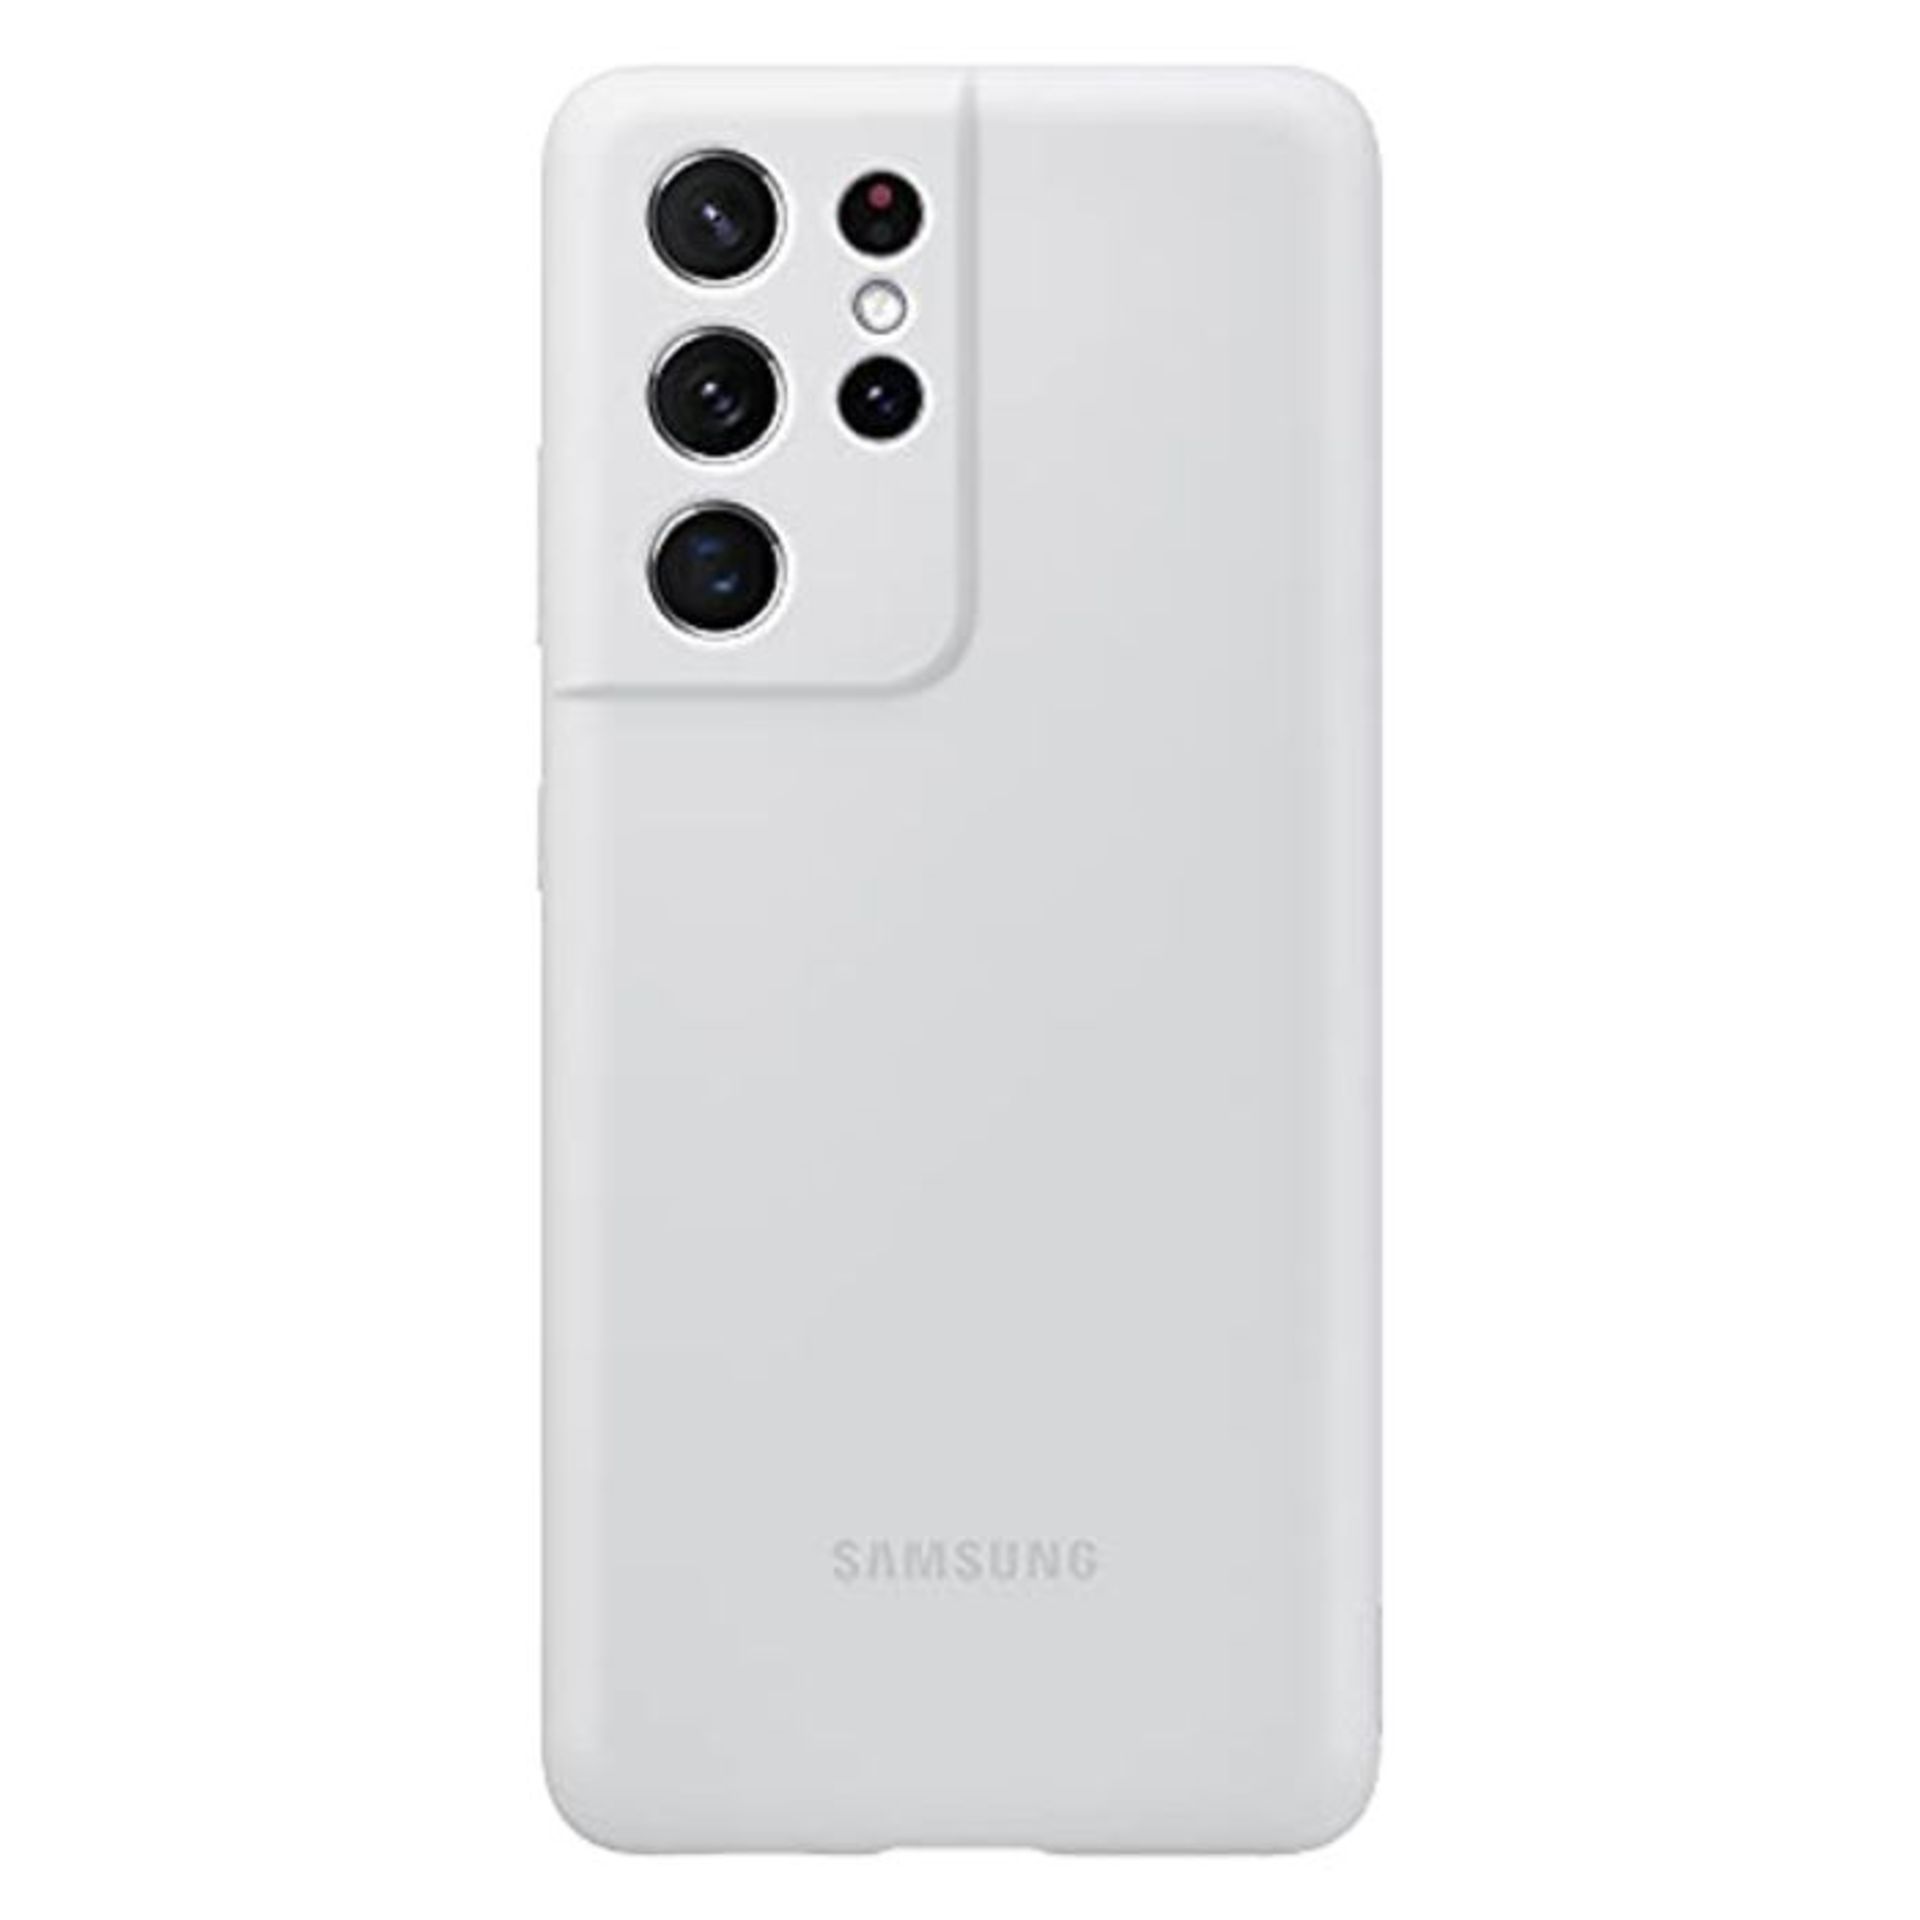 Samsung Galaxy S21 Ultra 5G Silicone Cover Light Gray - 6.8 inches - Image 3 of 4